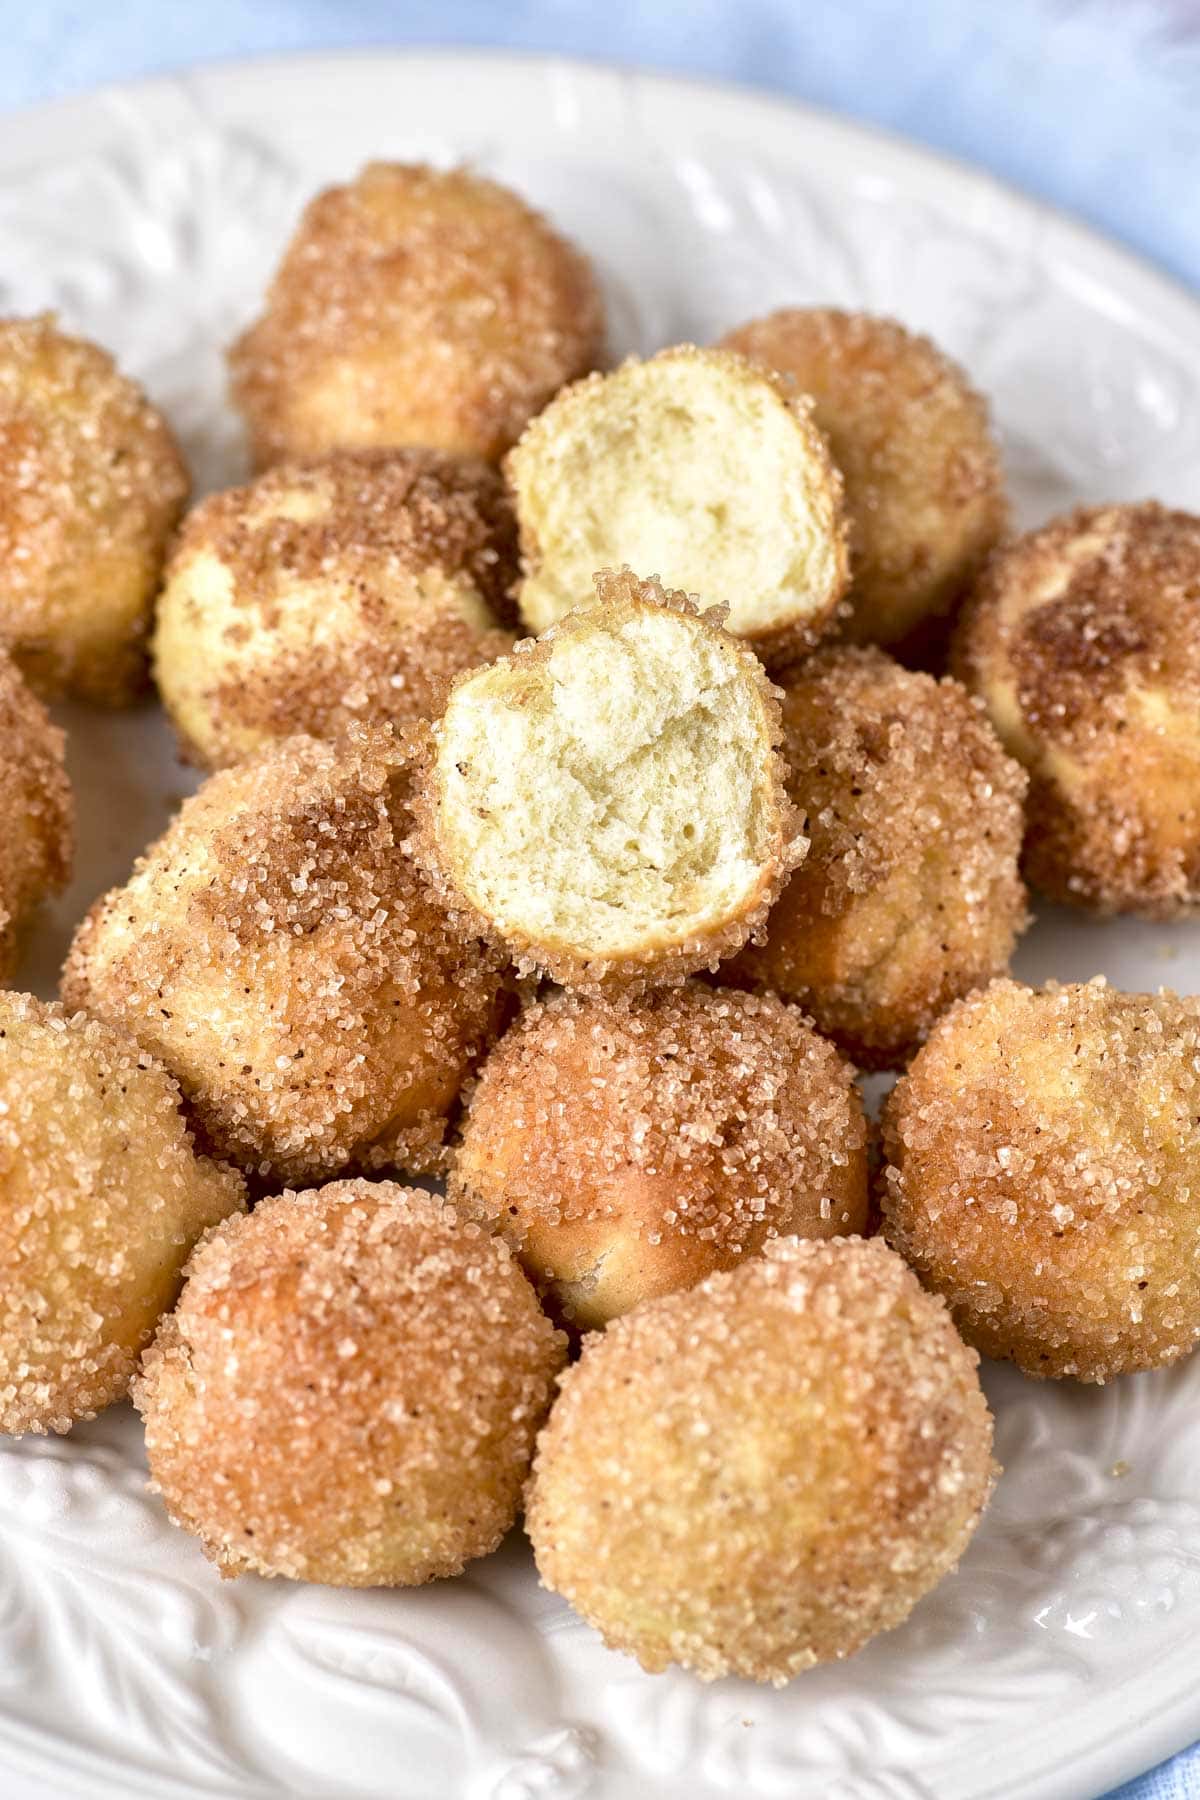 close-up photo of many donut holes covered in cinnamon and sugar on plate, one ripped in half.